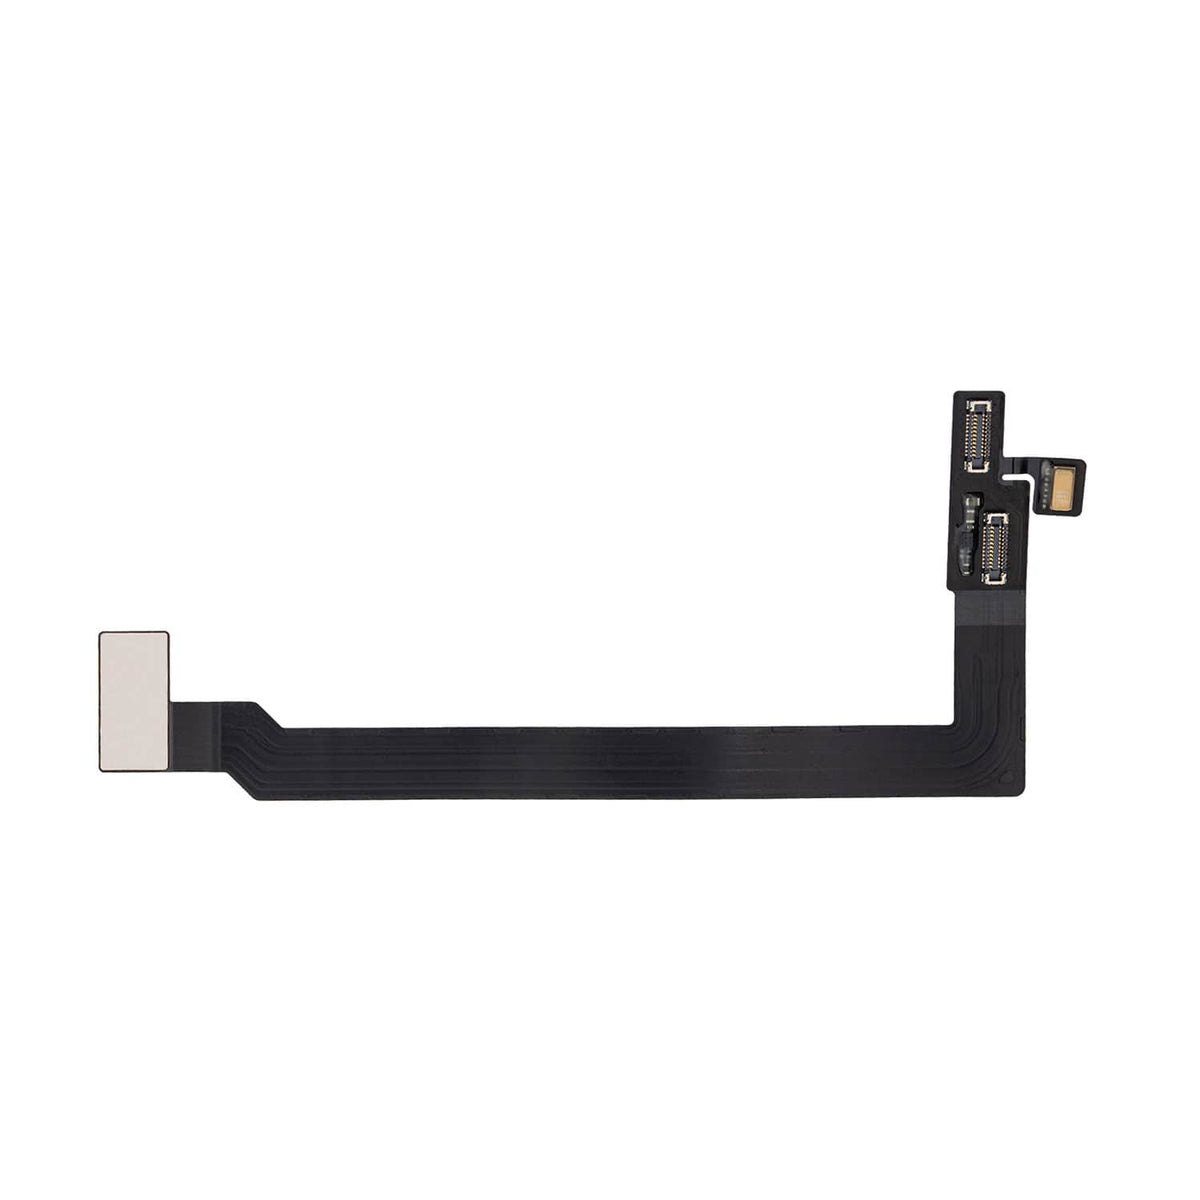 REAR CAMERA EXTENSION FLEX CABLE FOR IPAD PRO 12.9 3RD